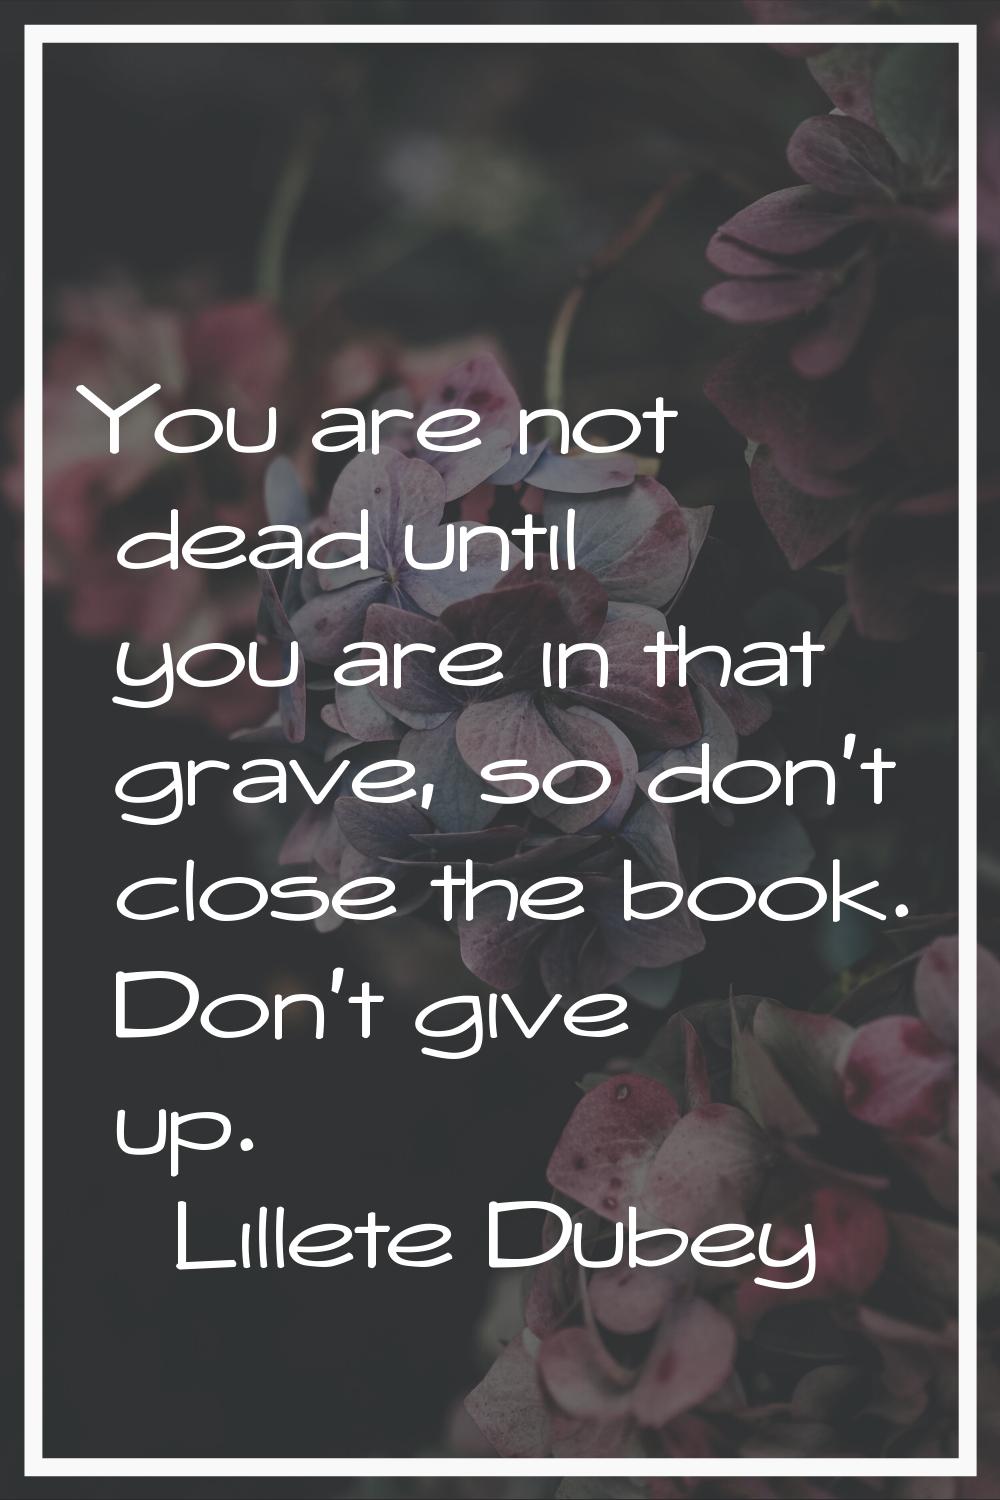 You are not dead until you are in that grave, so don't close the book. Don't give up.